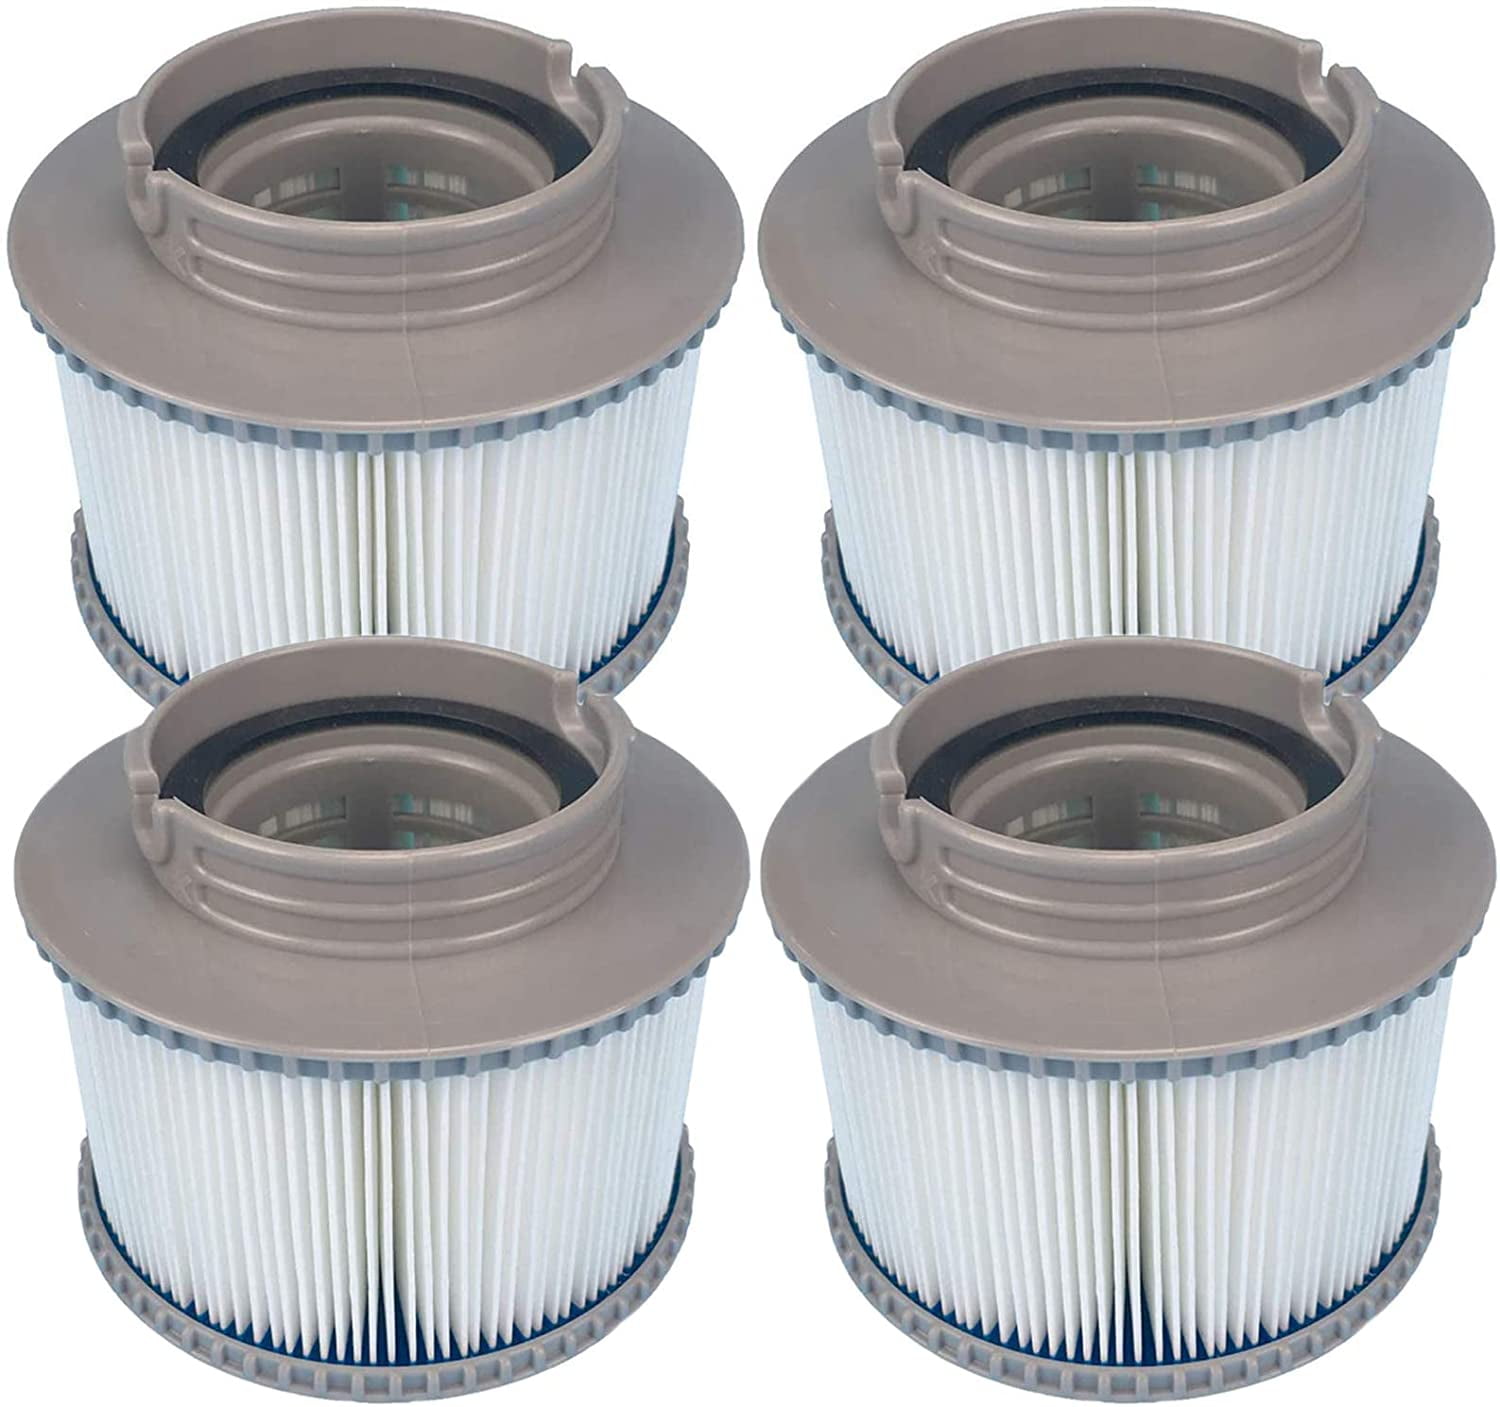 3Pcs MSPA FD2089 Filter Cartridge Replacement Part for Swimming Pool Hot Tub